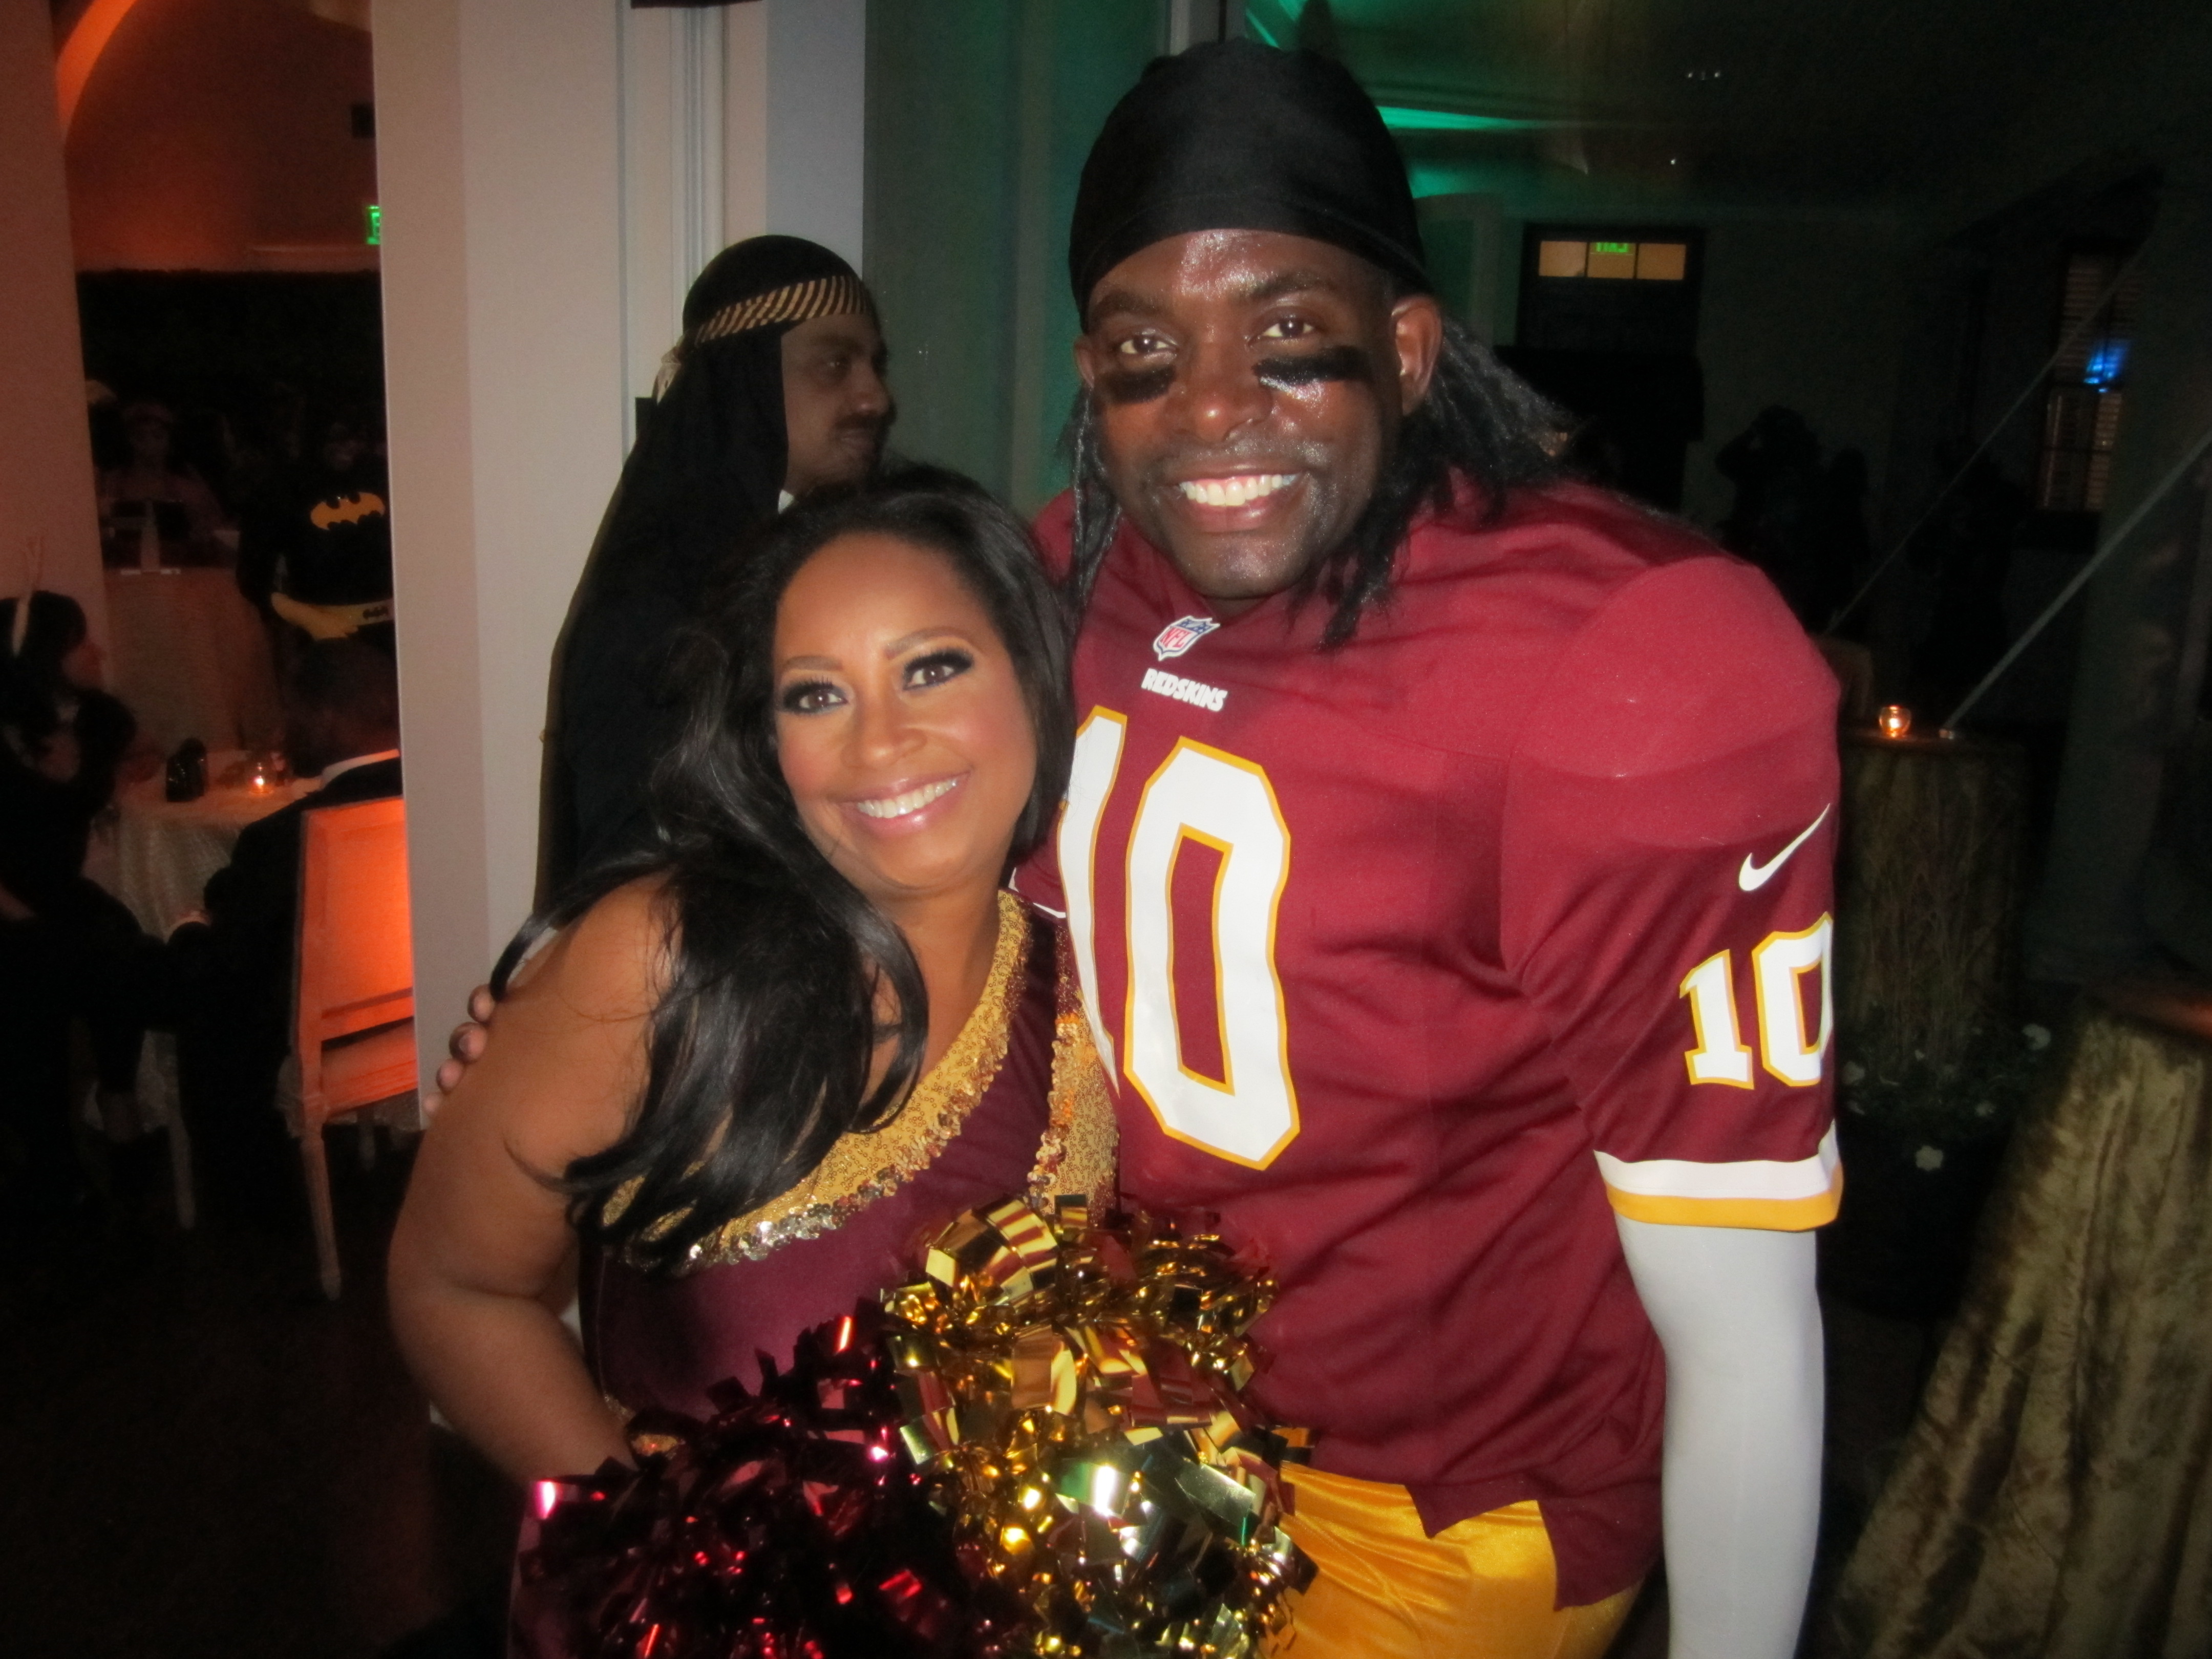 [Party Pix] The Field’s Most Famous at Andre Wells’ Fancy Costume Fete